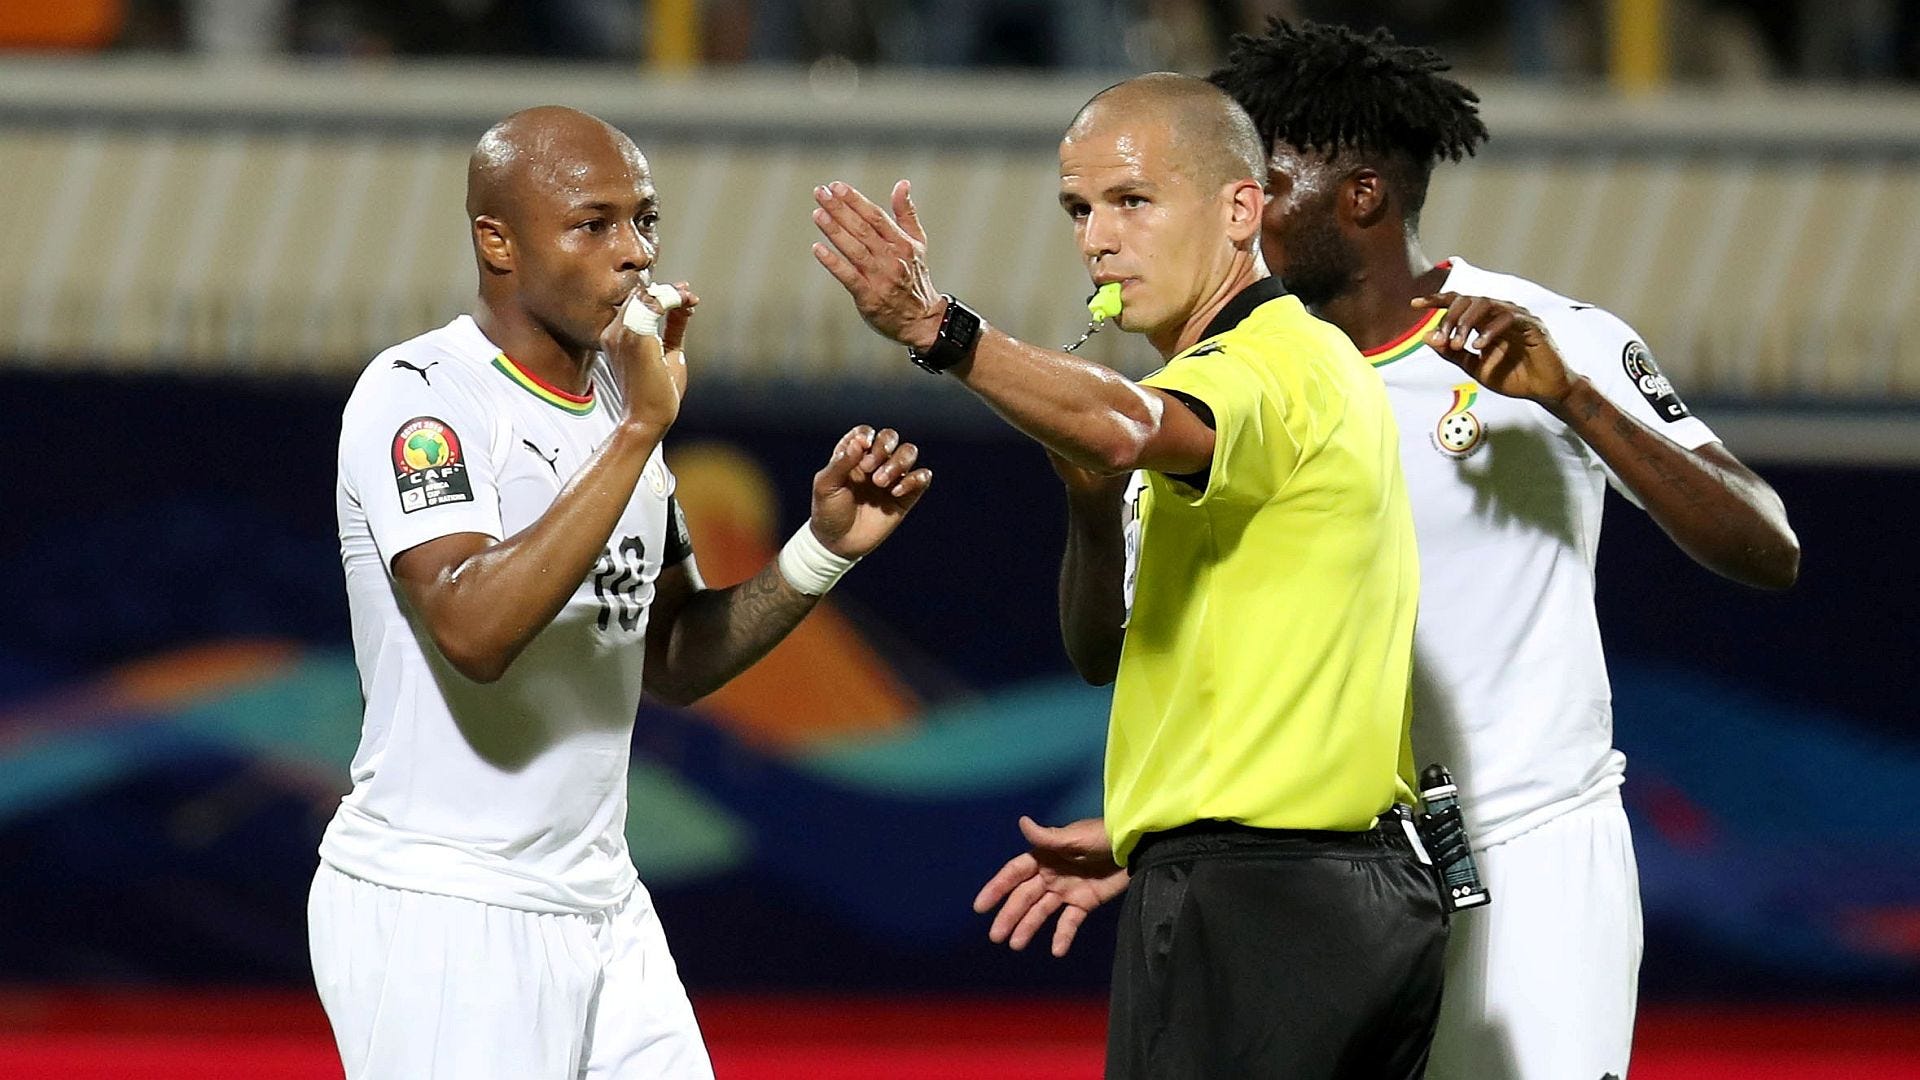 Andre Ayew and Thomas Teye Partey of Ghana, referee Victor Gomes, 2019 Afcon